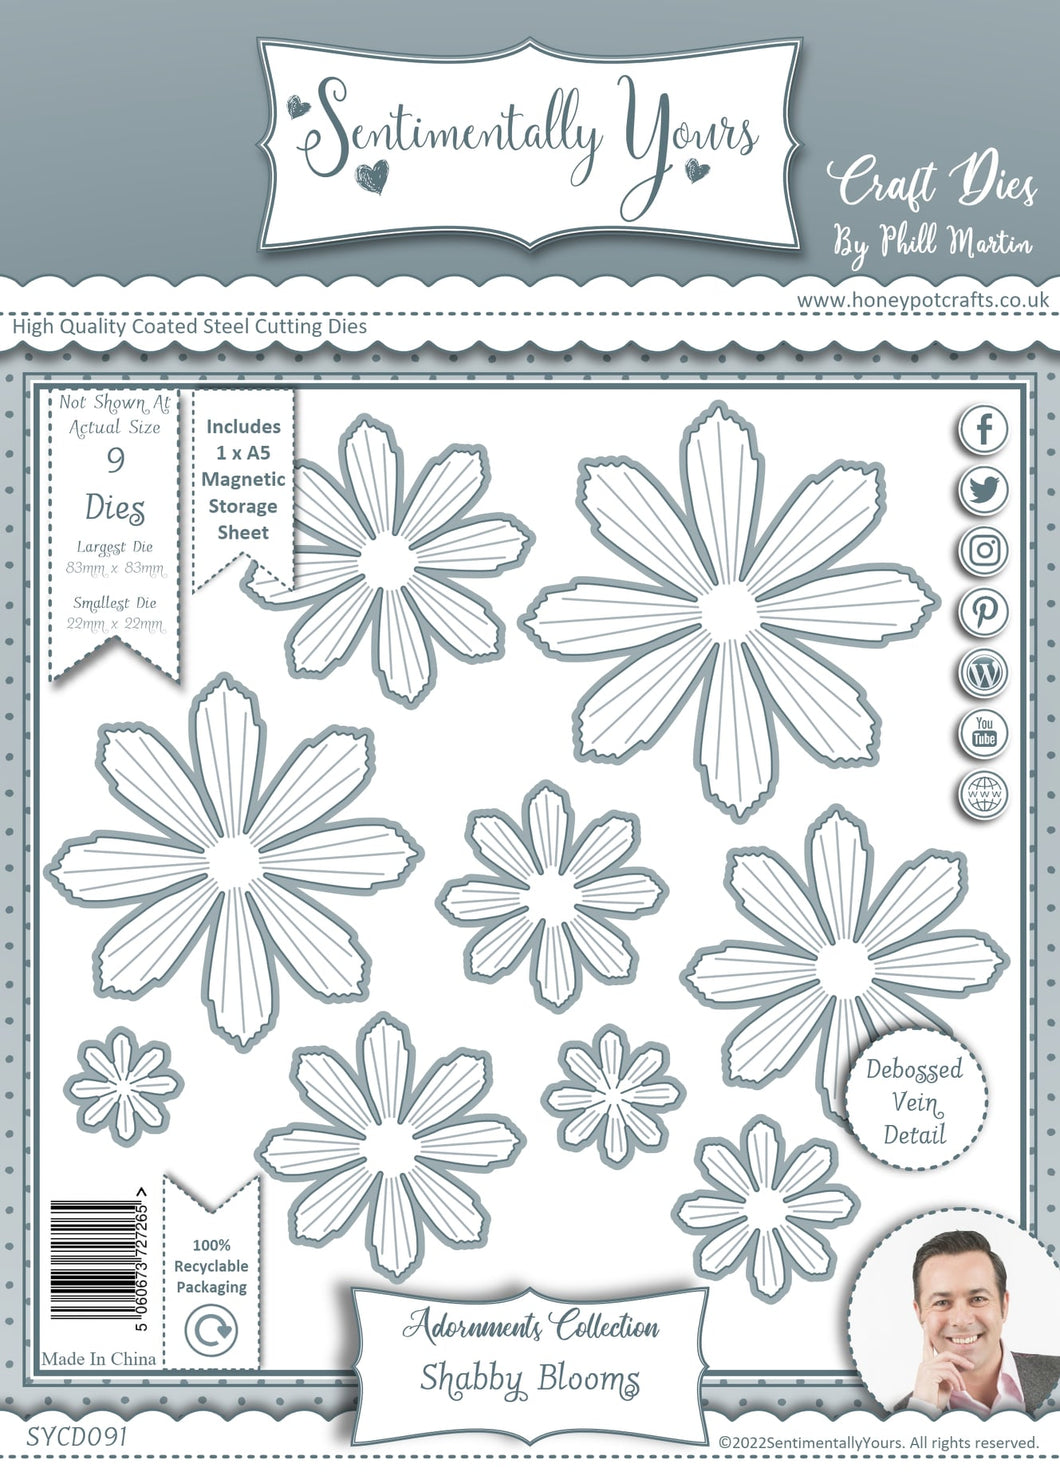 Phill Martin Sentimentally Yours Adornments Collection - Shabby Blooms Die Set